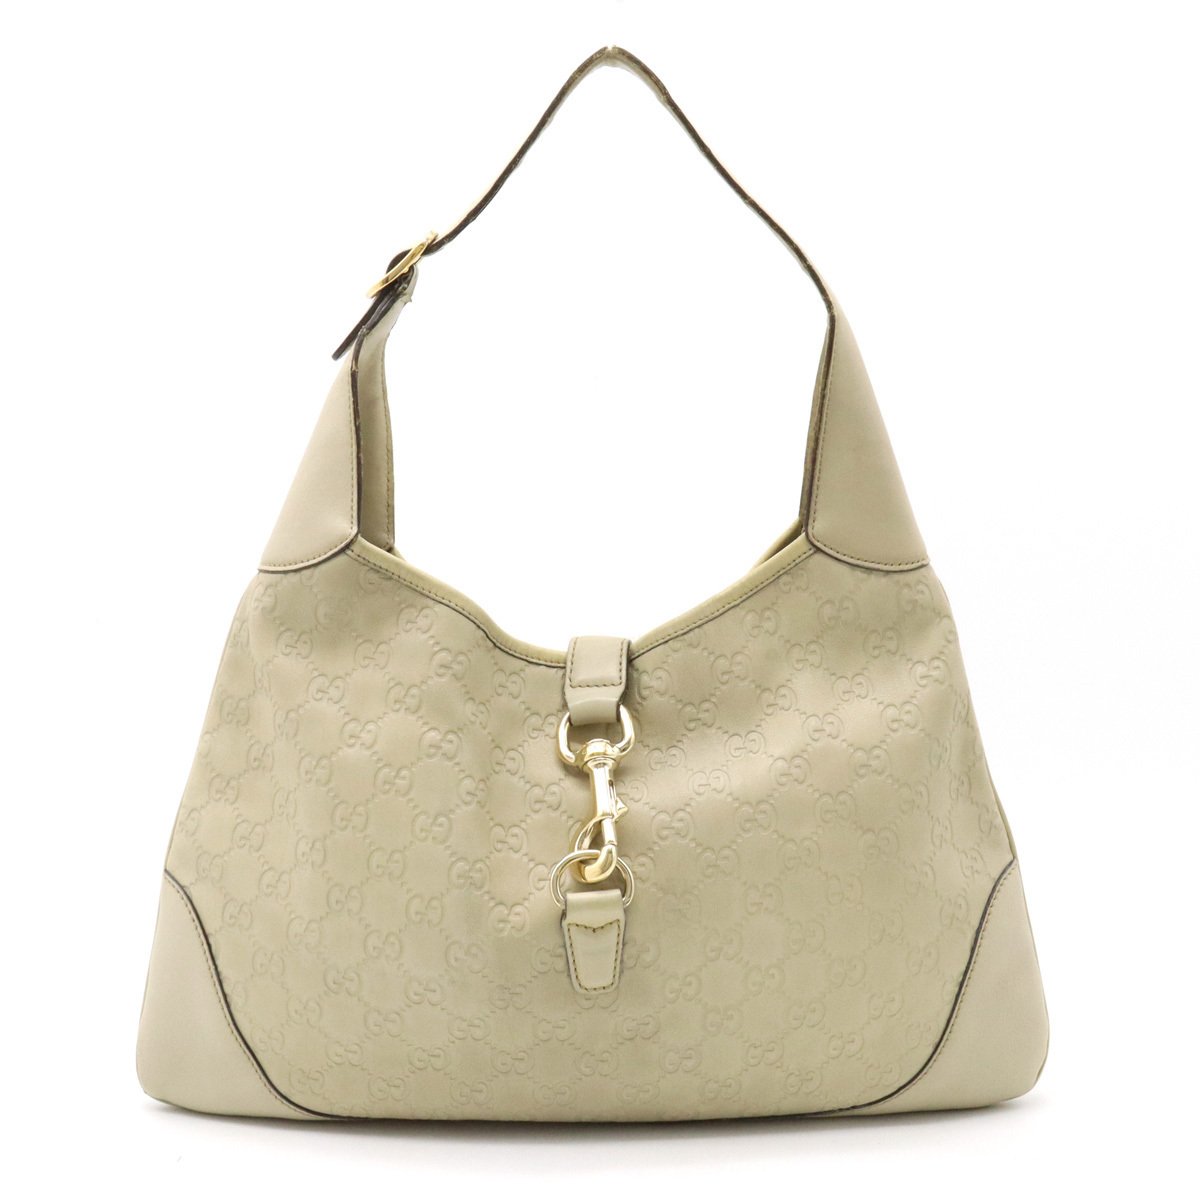 Gucci Jackie Bag in Light Yellow / Beige Leather -  Hong Kong